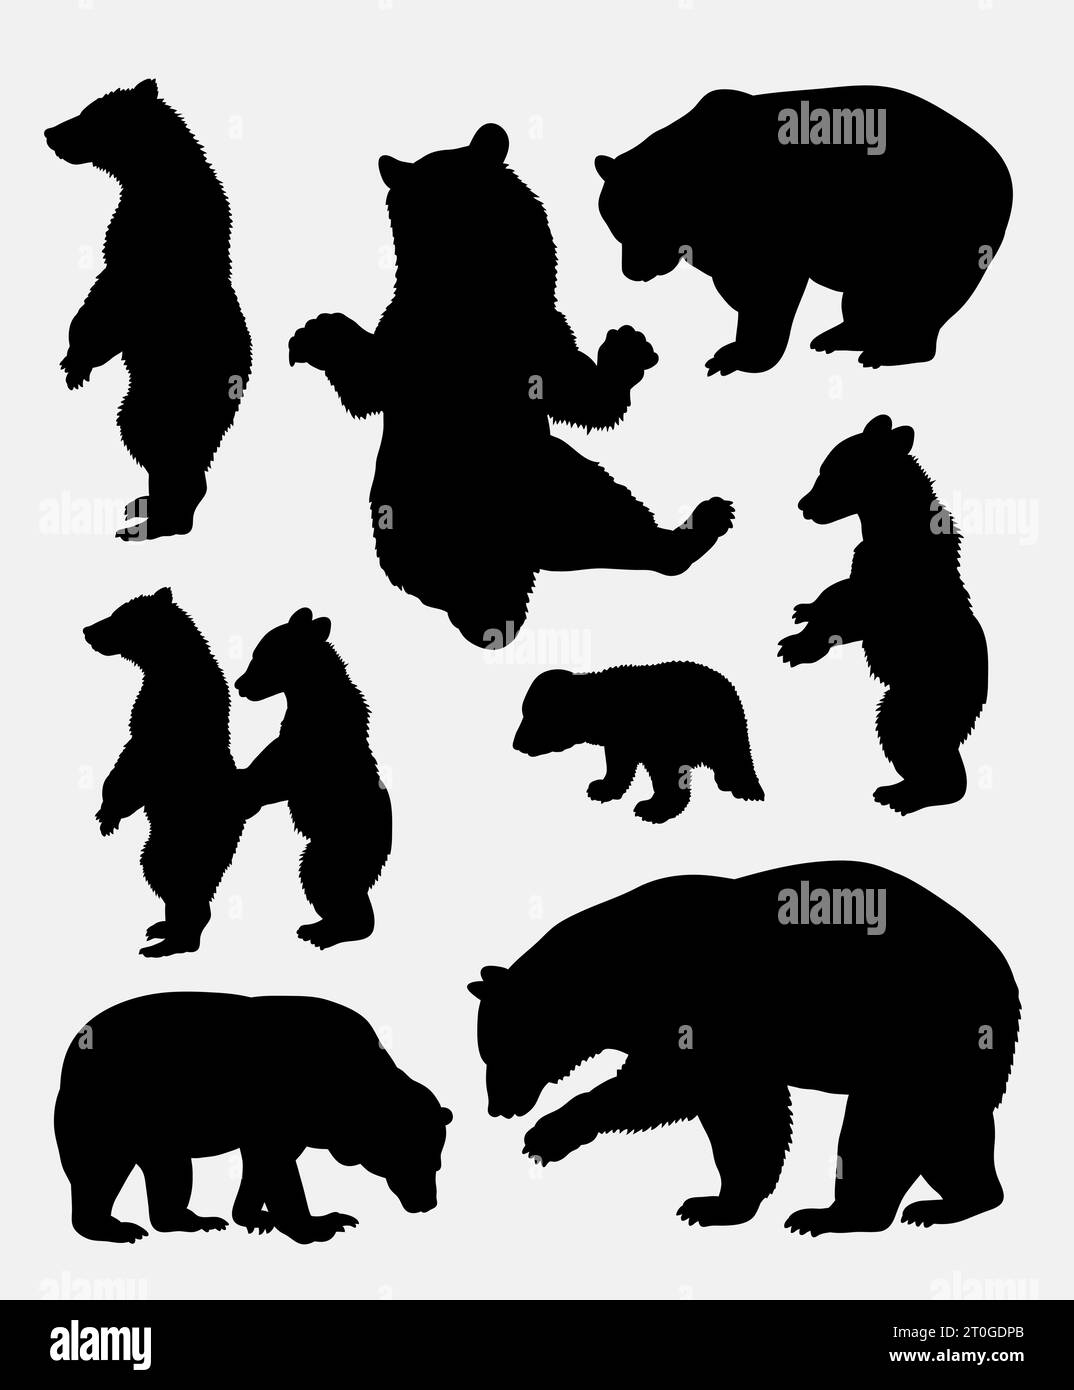 grizzly bear activity silhouette Stock Vector